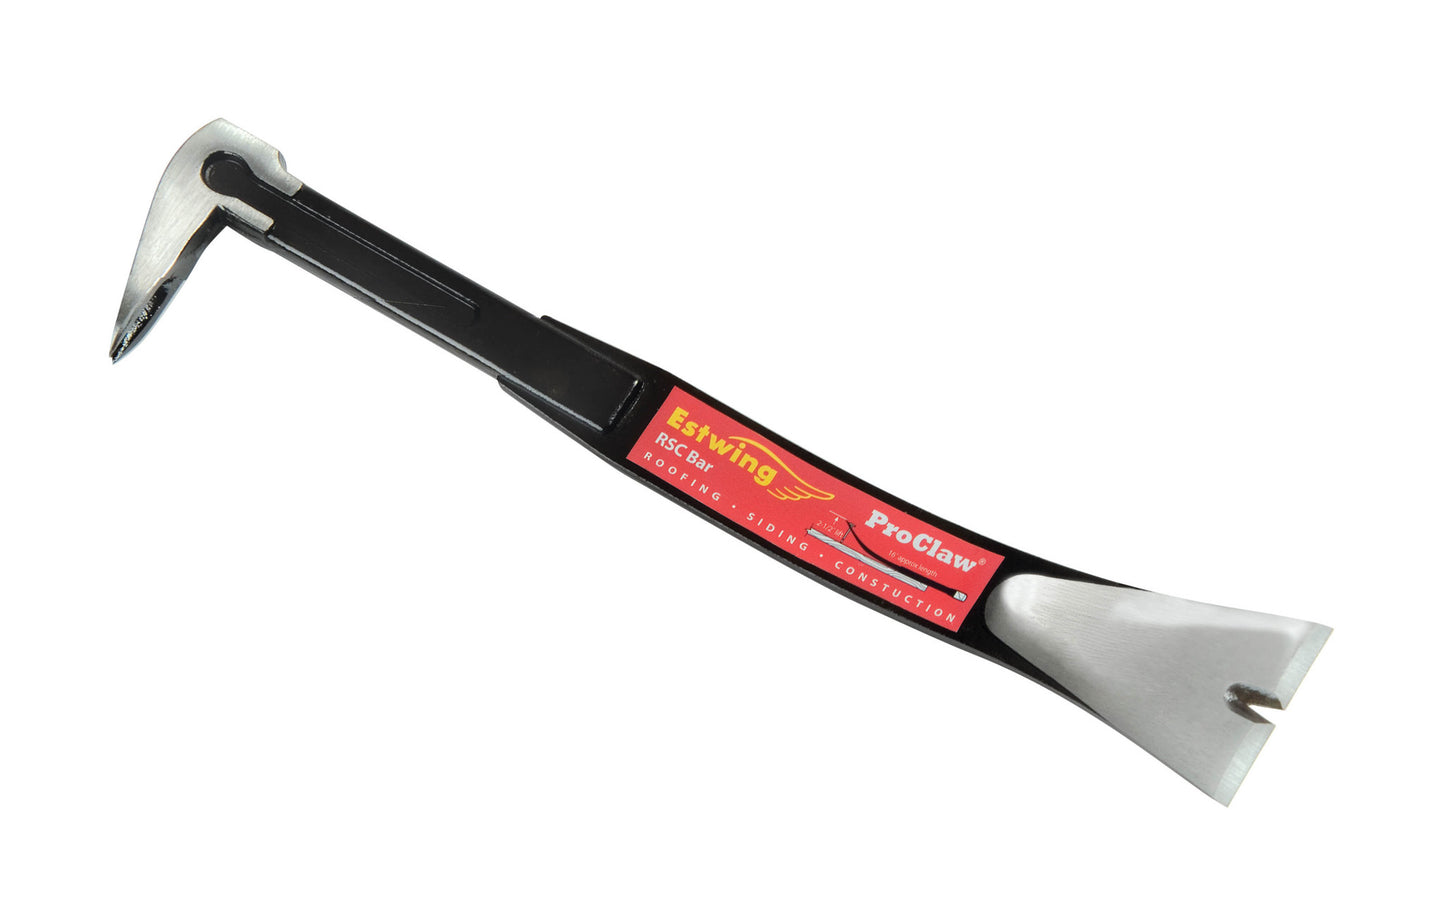 The Estwing "Pro Claw" RSC Bar is a three-in-one nail puller, the roofing, siding, & construction bar. 16" length. Heavy duty & stout. Made in USA.